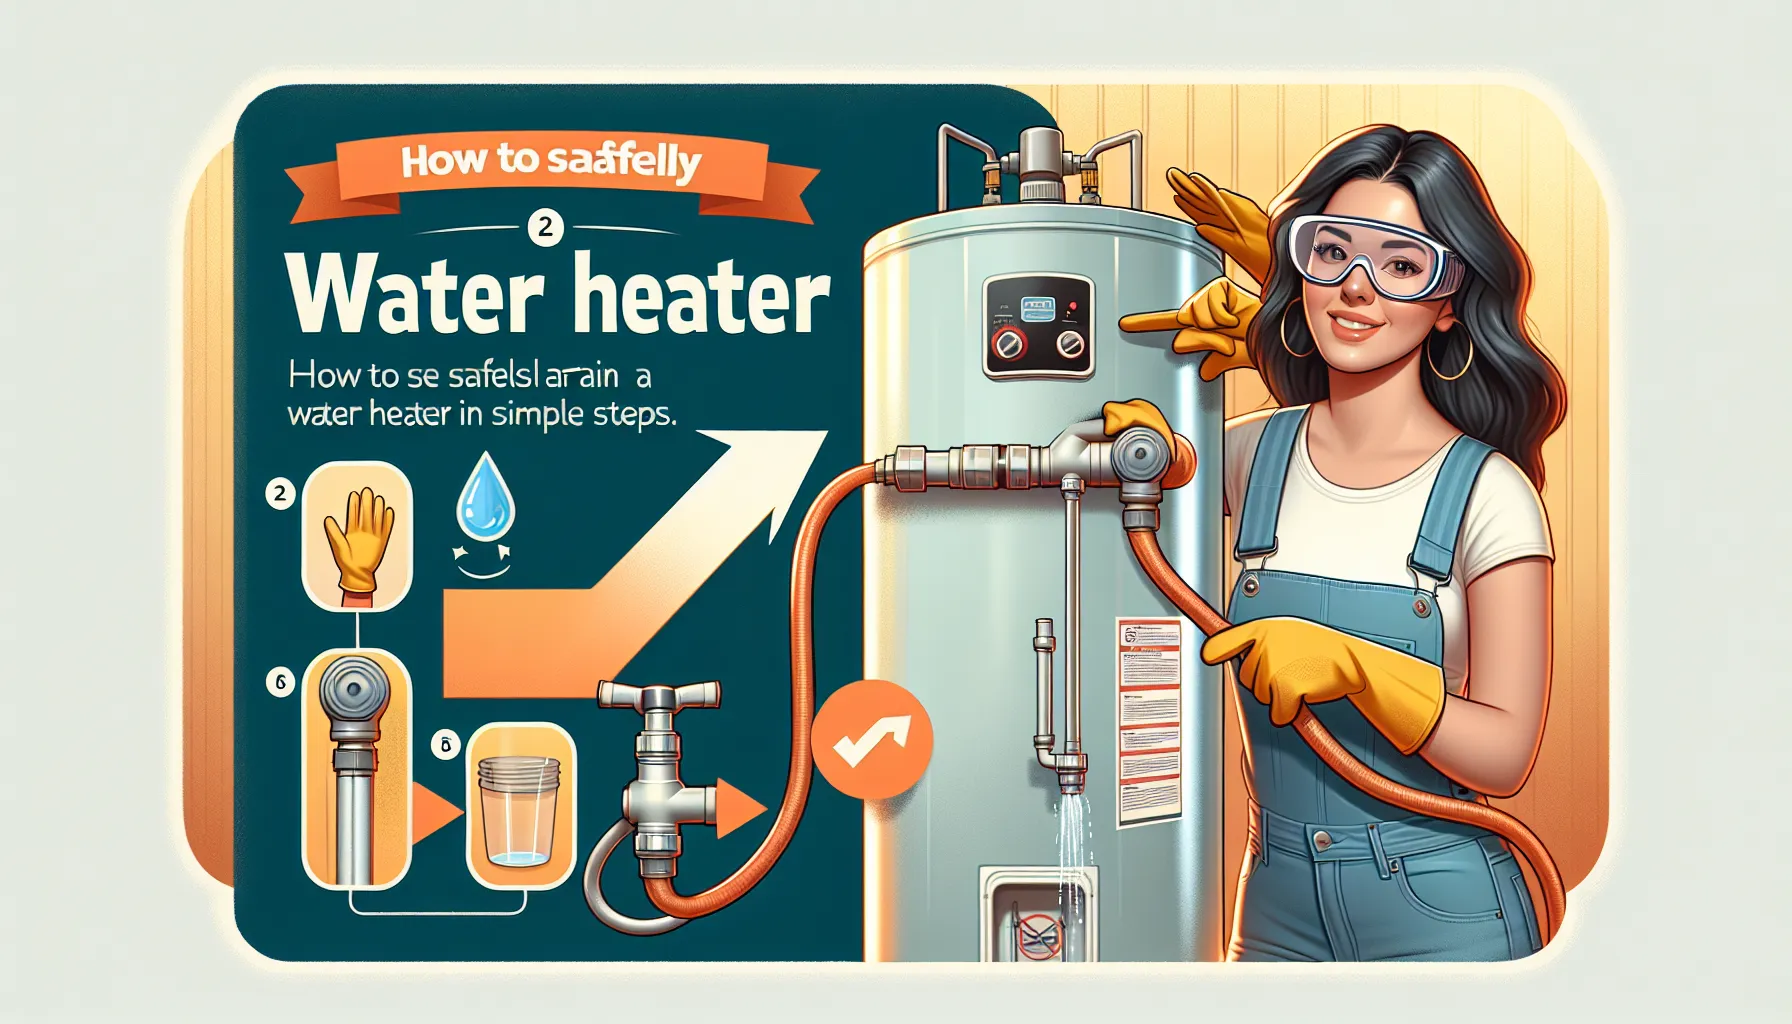 How to Safely Drain a Water Heater in Simple Steps